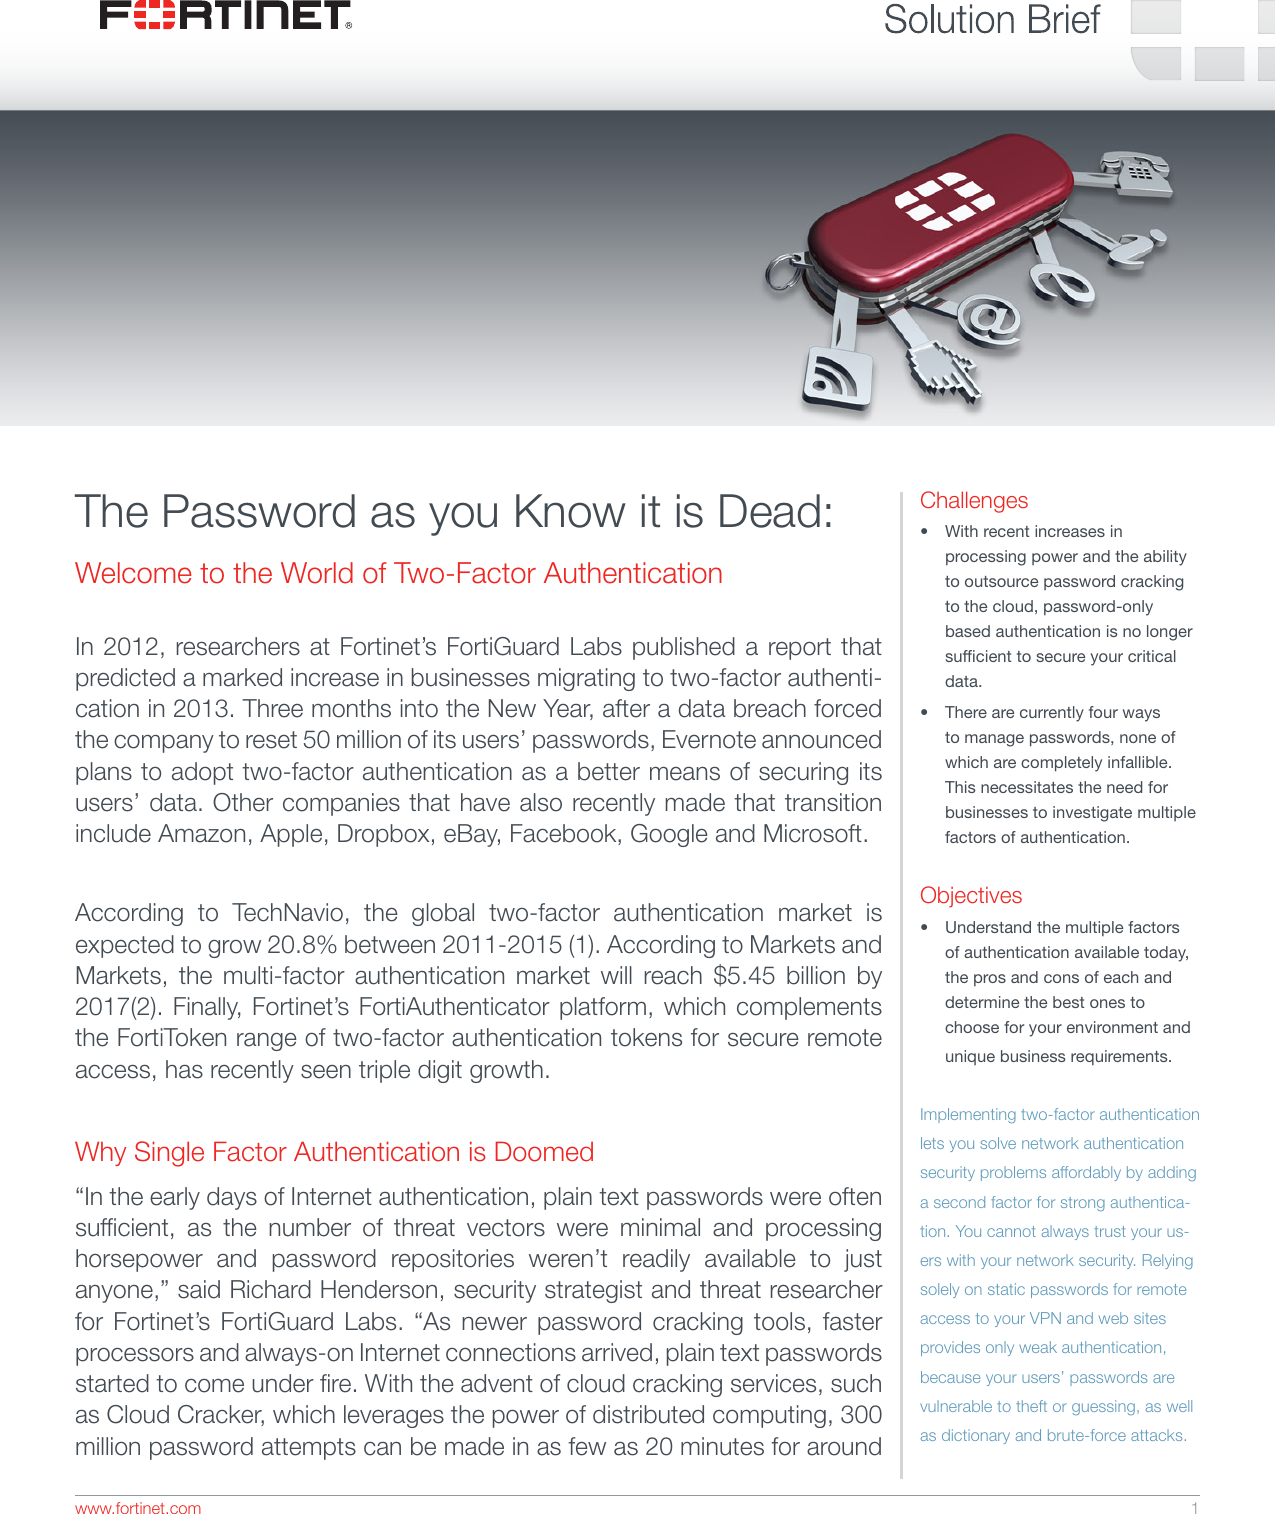 Page 1 of 4 - Solution-Brief-Two-Factor-Authentication